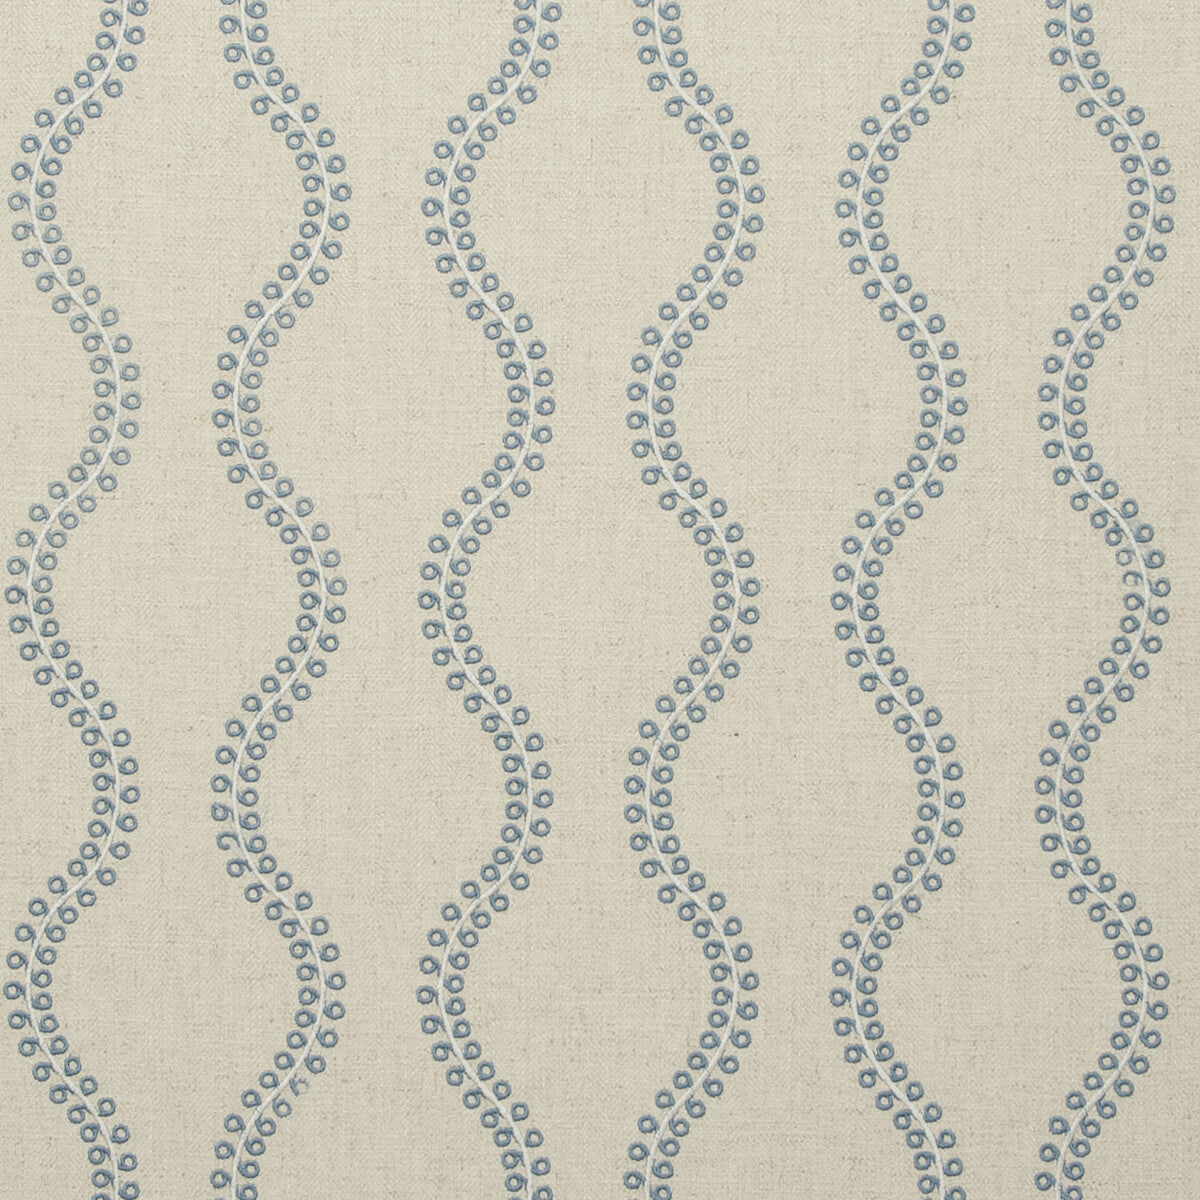 Woburn fabric in chambray color - pattern F0741/02.CAC.0 - by Clarke And Clarke in the Clarke &amp; Clarke Manor House collection